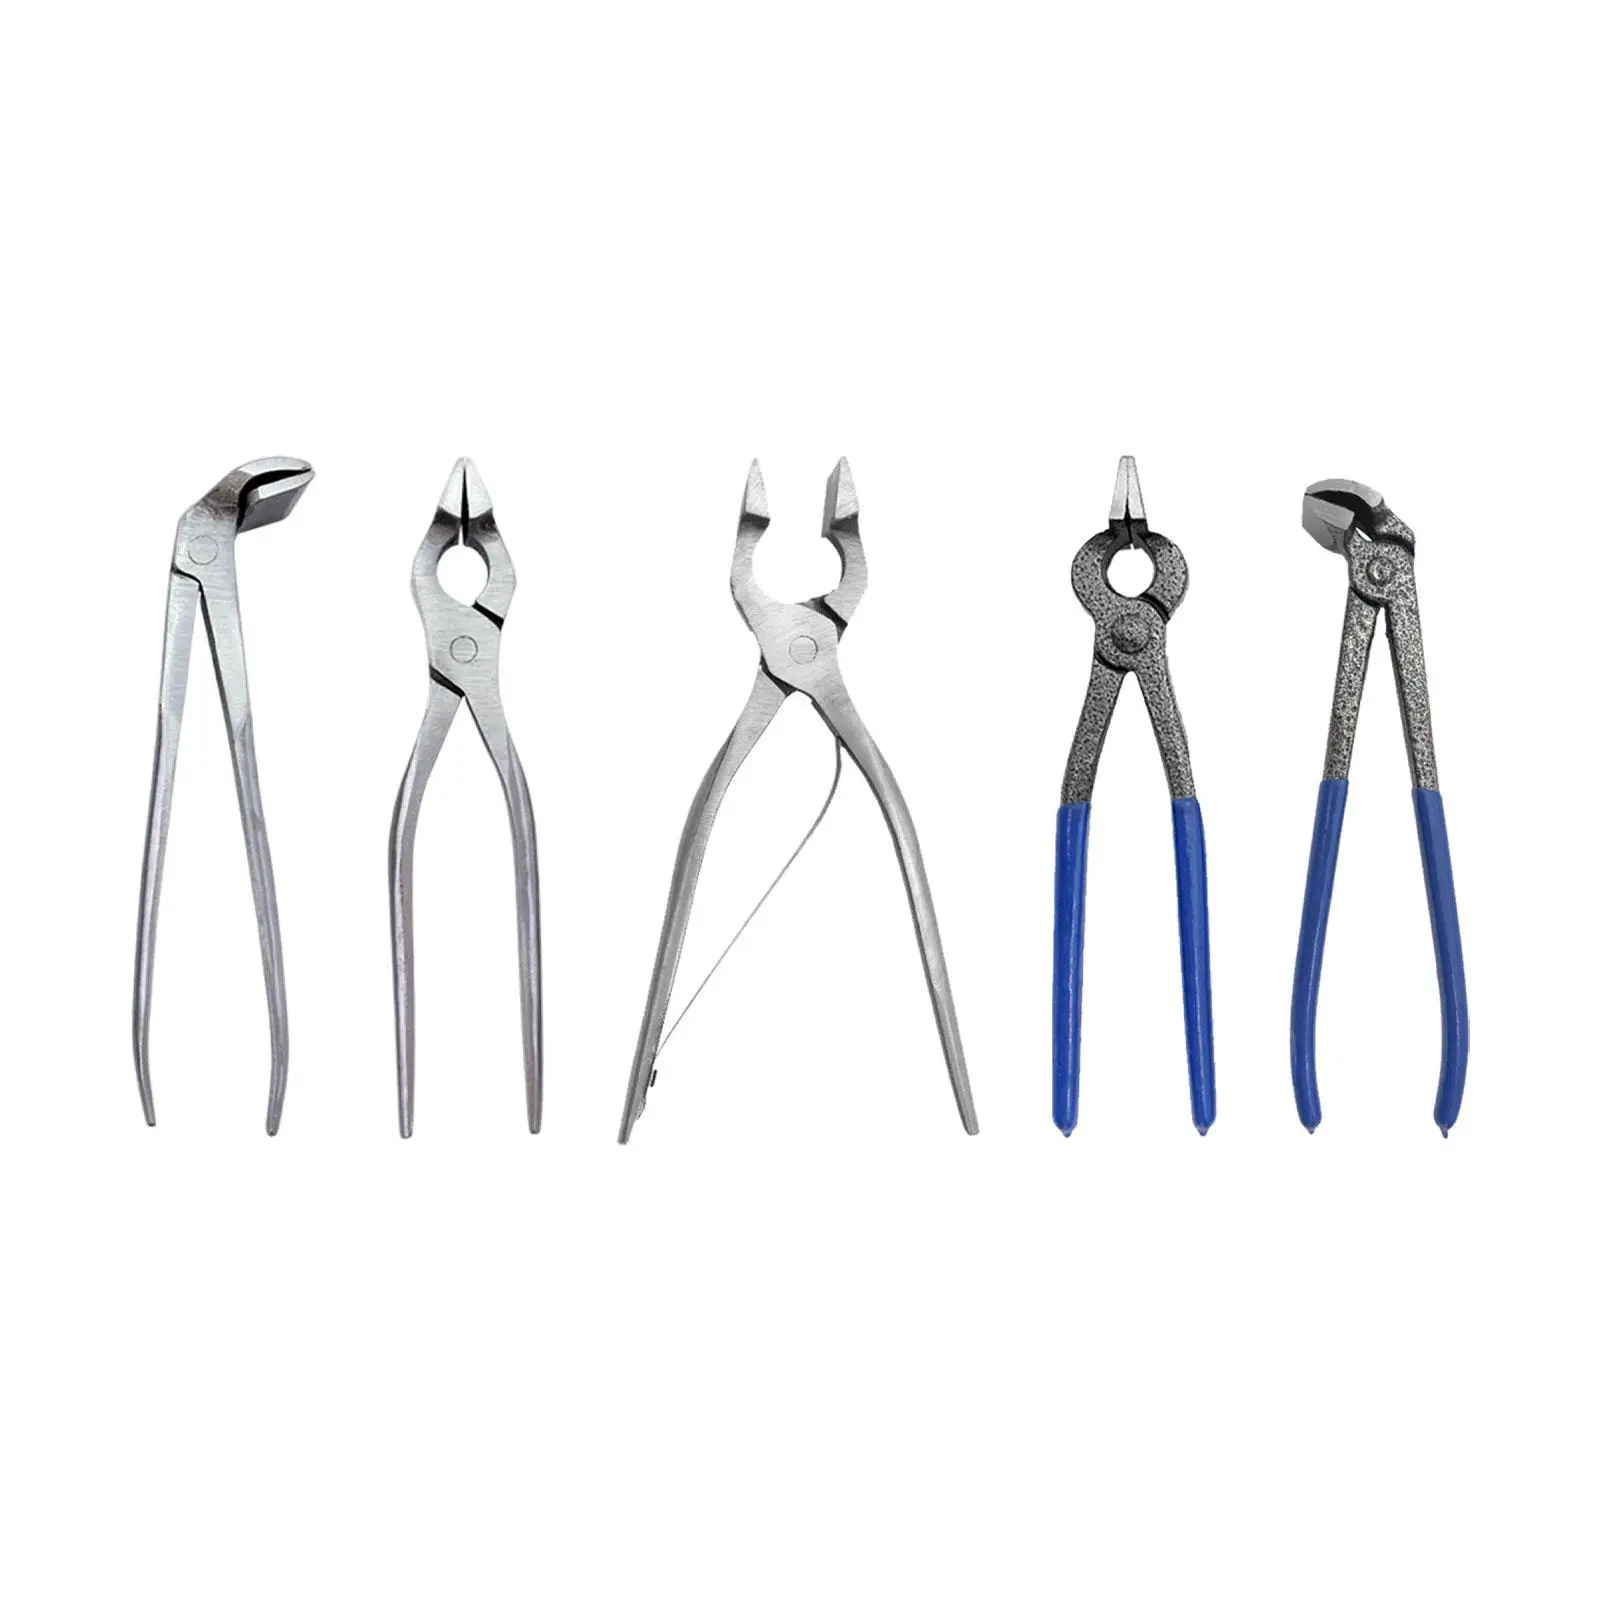 Leather Clamp Plier Leathercraft Edge Clamp Steel Bend Head Adjustment Press Flatten Pliers Clamp Cutting Side Snips Flat Pliers